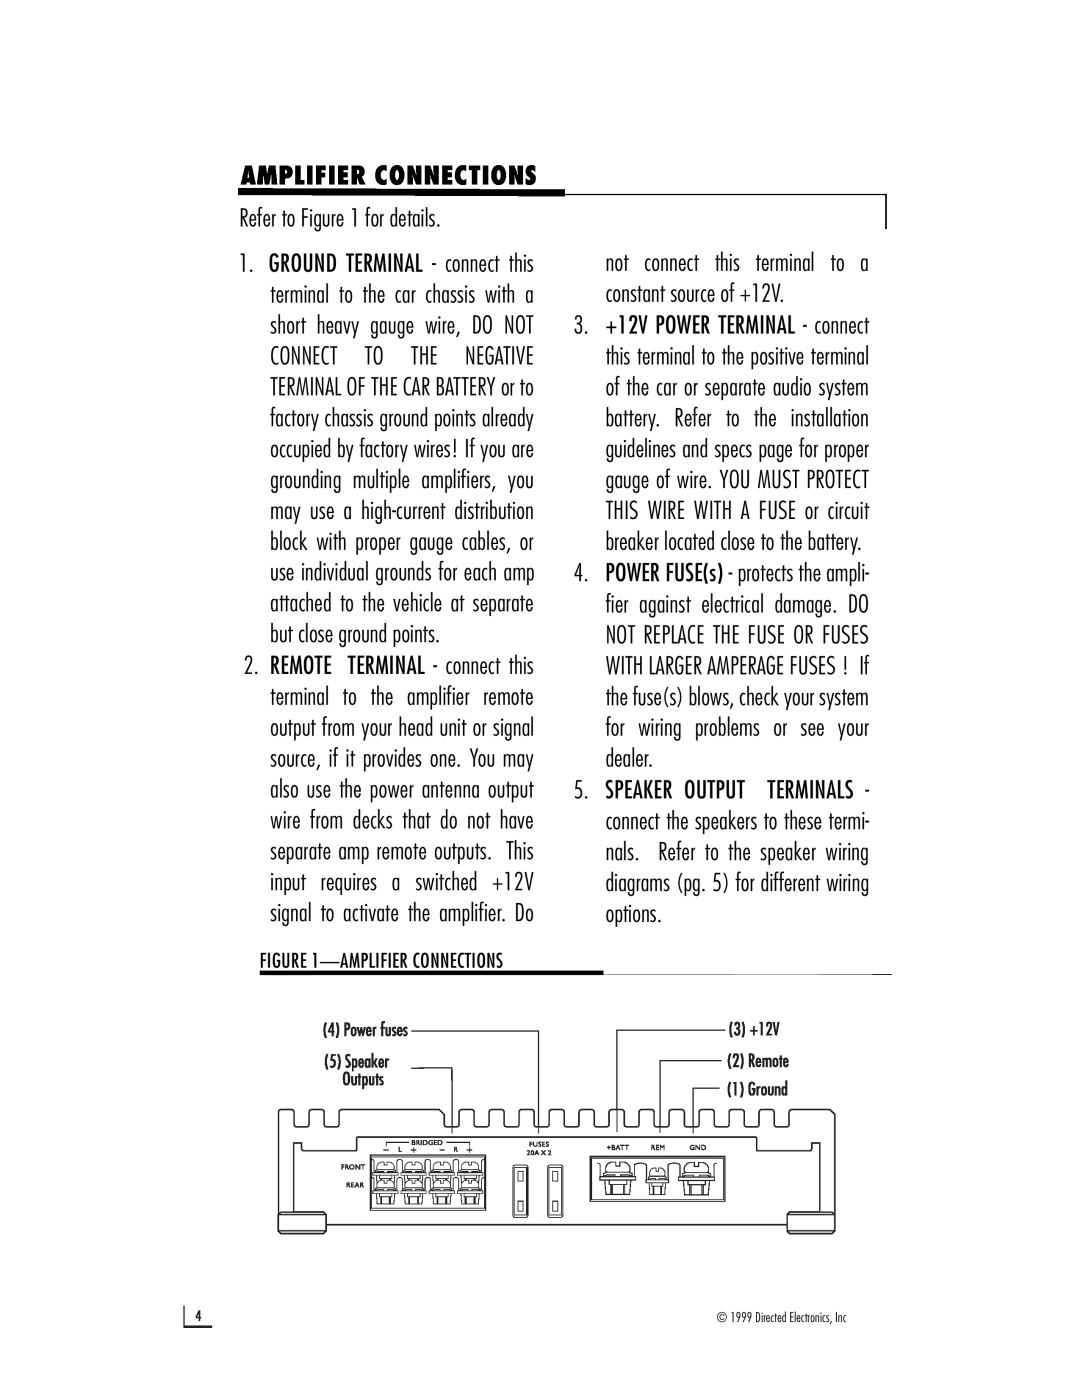 Directed Electronics 500 owner manual Amplifier Connections, Refer to for details 